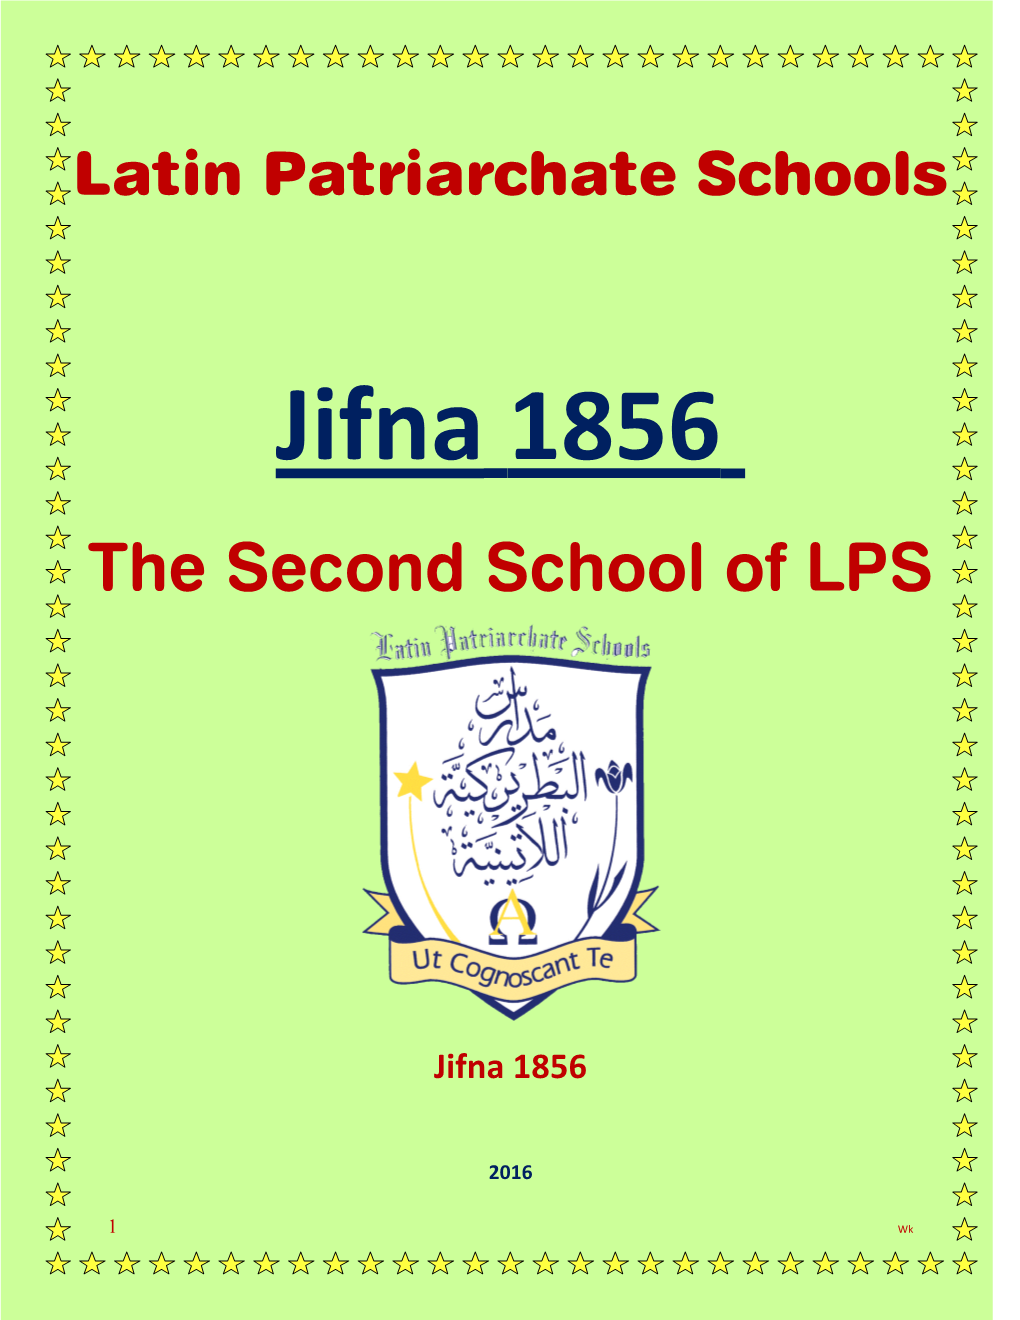 Jifna 1856 the Second School of LPS